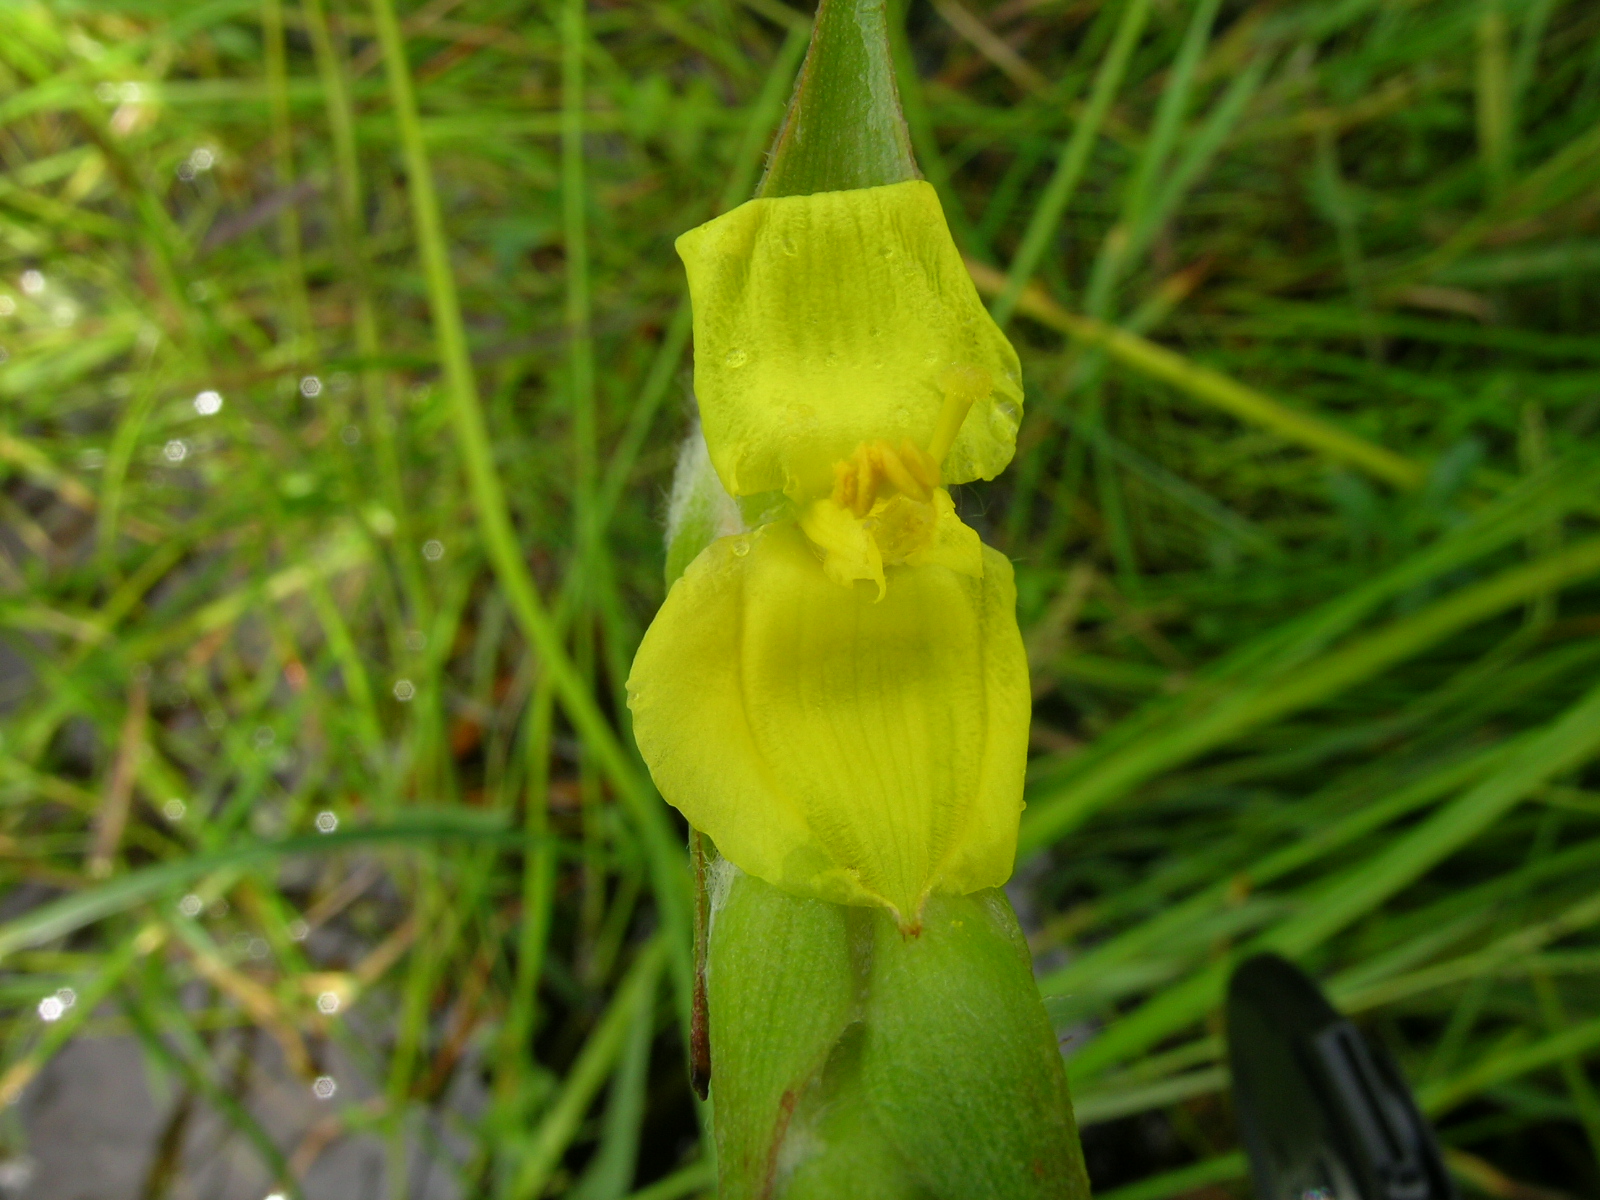 Close up of yellow-green flower